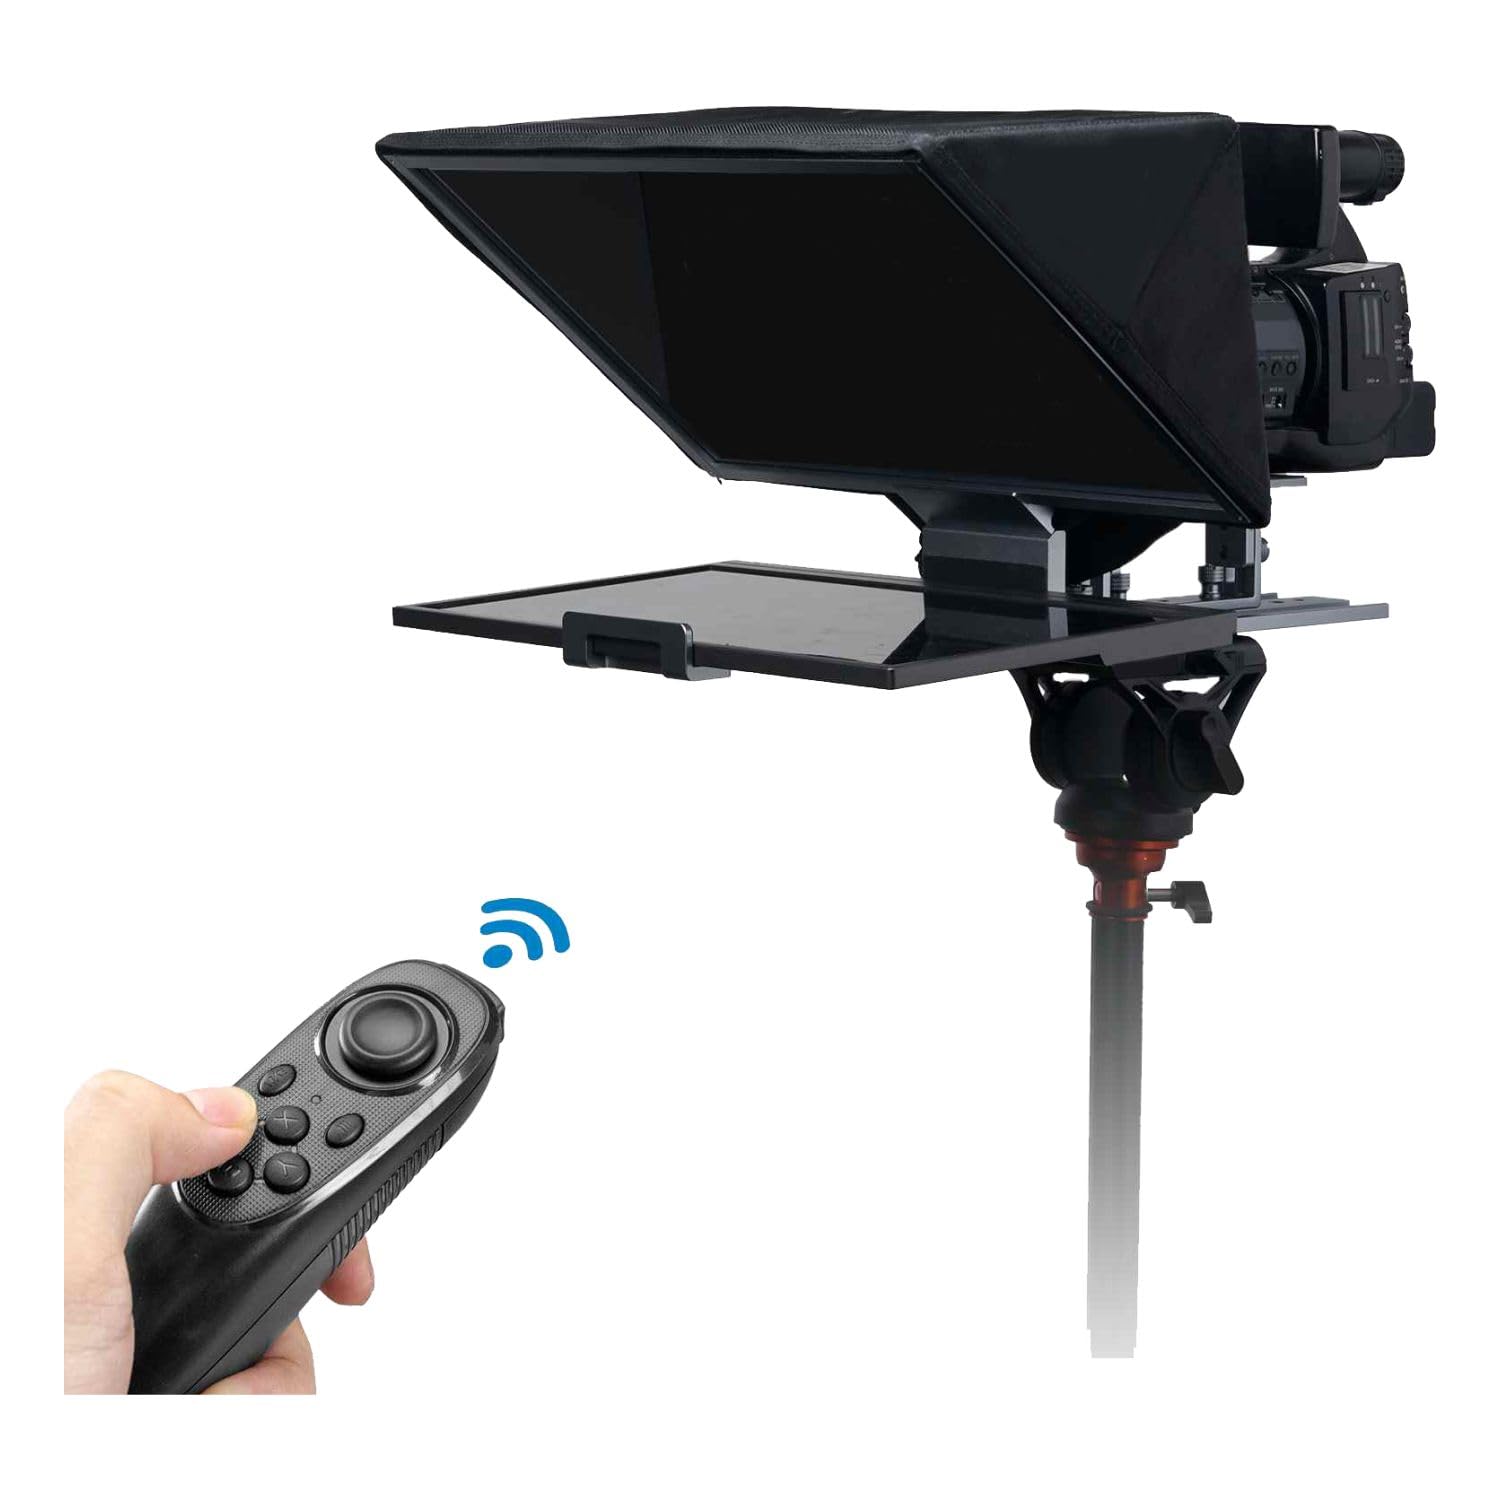 Digitek (DTP-016) 16” Digitek Teleprompter for Smartphone & DSLR Supports w/Remote Control, APP Compatible with iOS & Android System for Video Creator